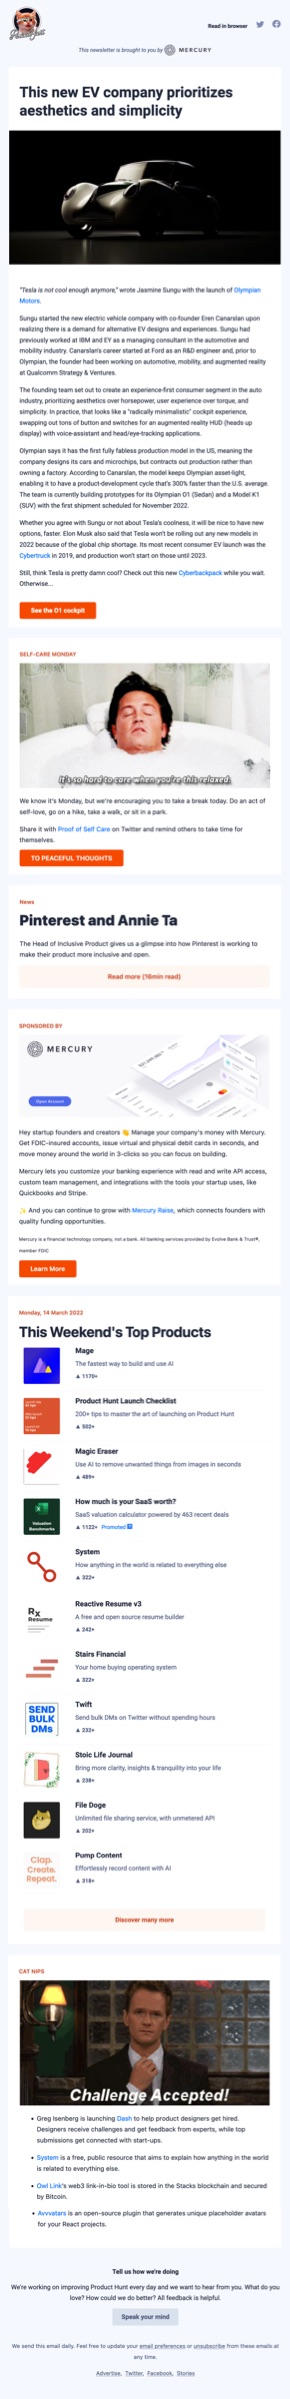 The ProductHunt newsletter - click to view larger version